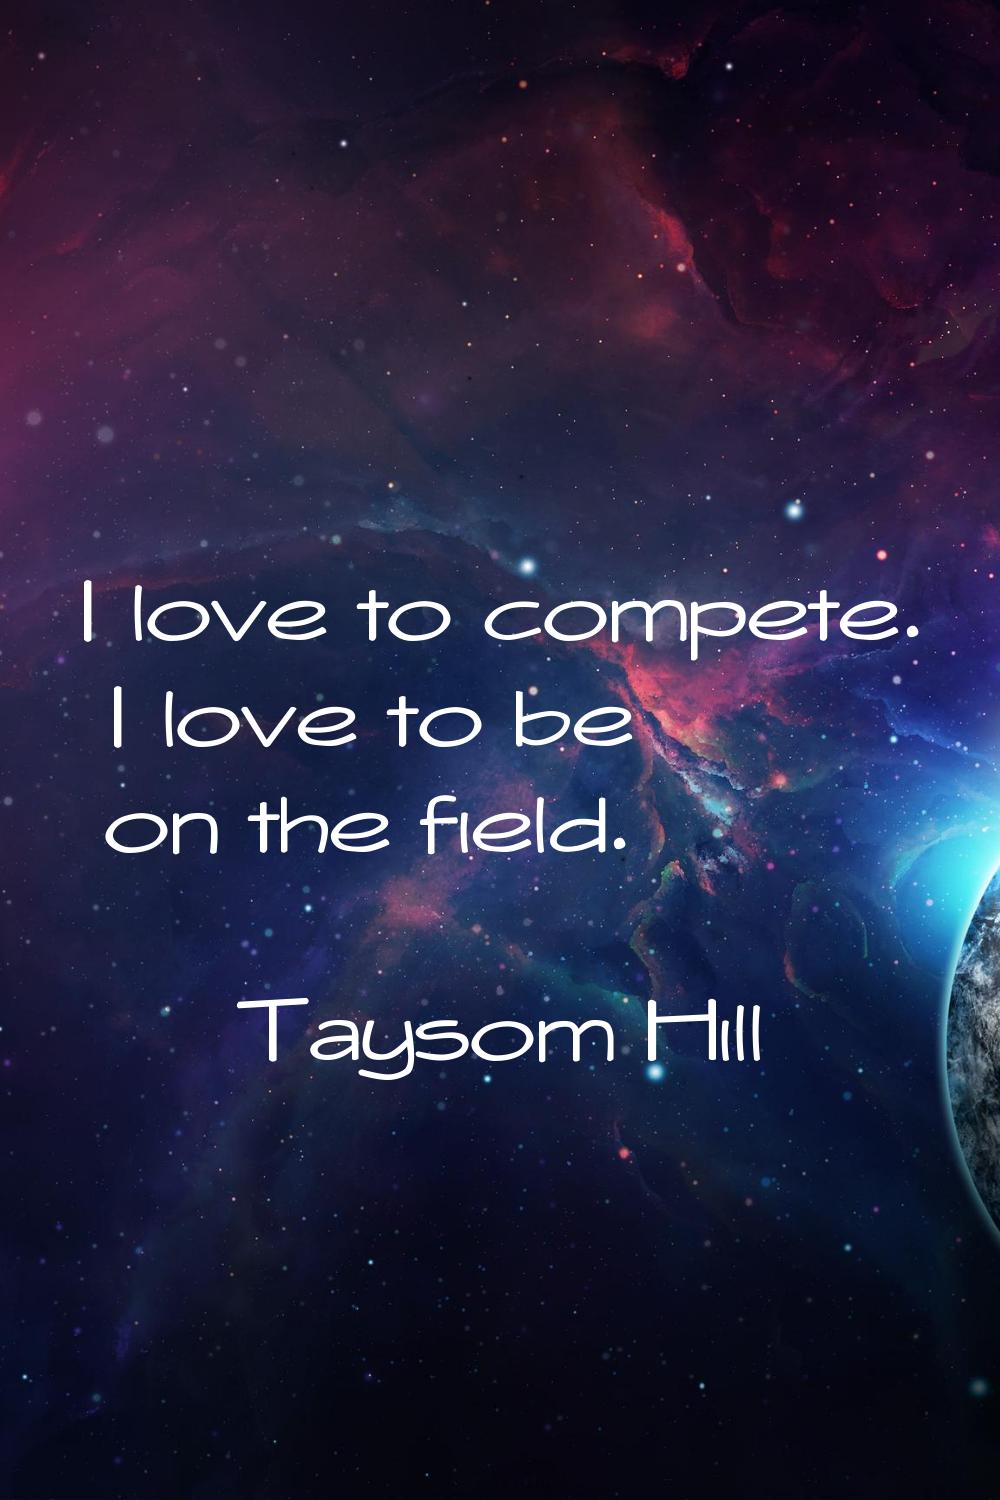 I love to compete. I love to be on the field.